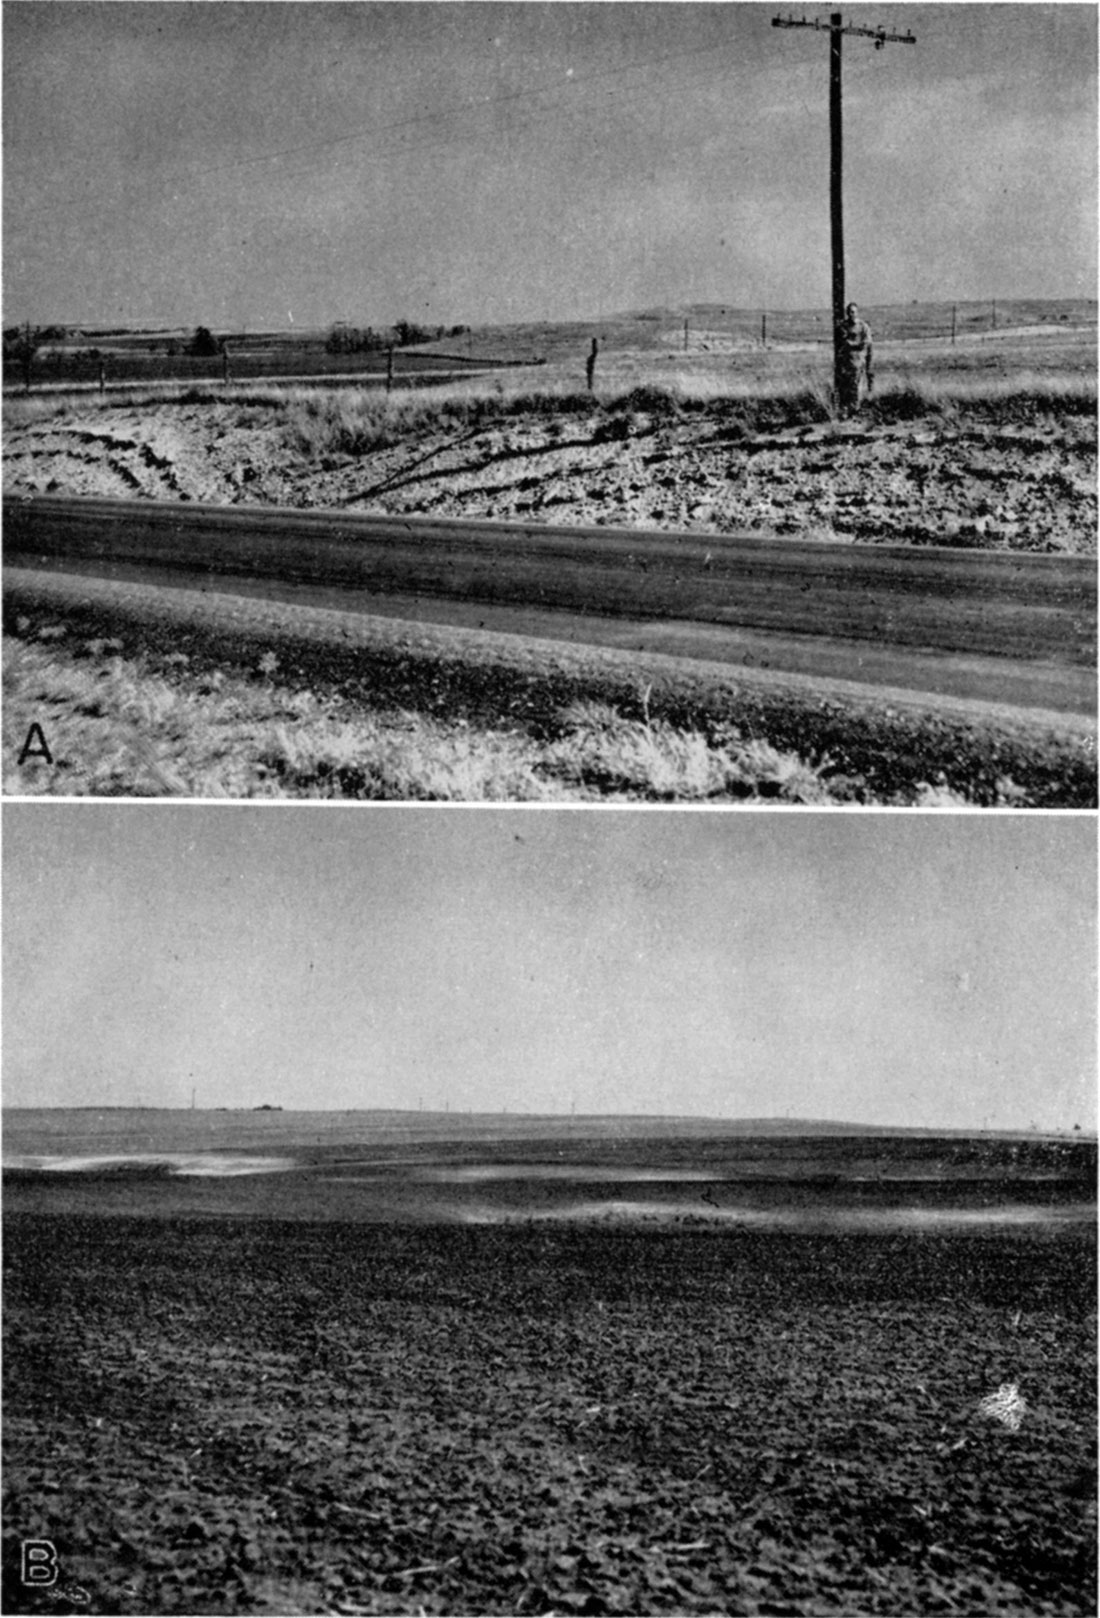 Two black and white photos; Limestone beds in Wellington formation, top is slump structure; bottom is of a plowed field.